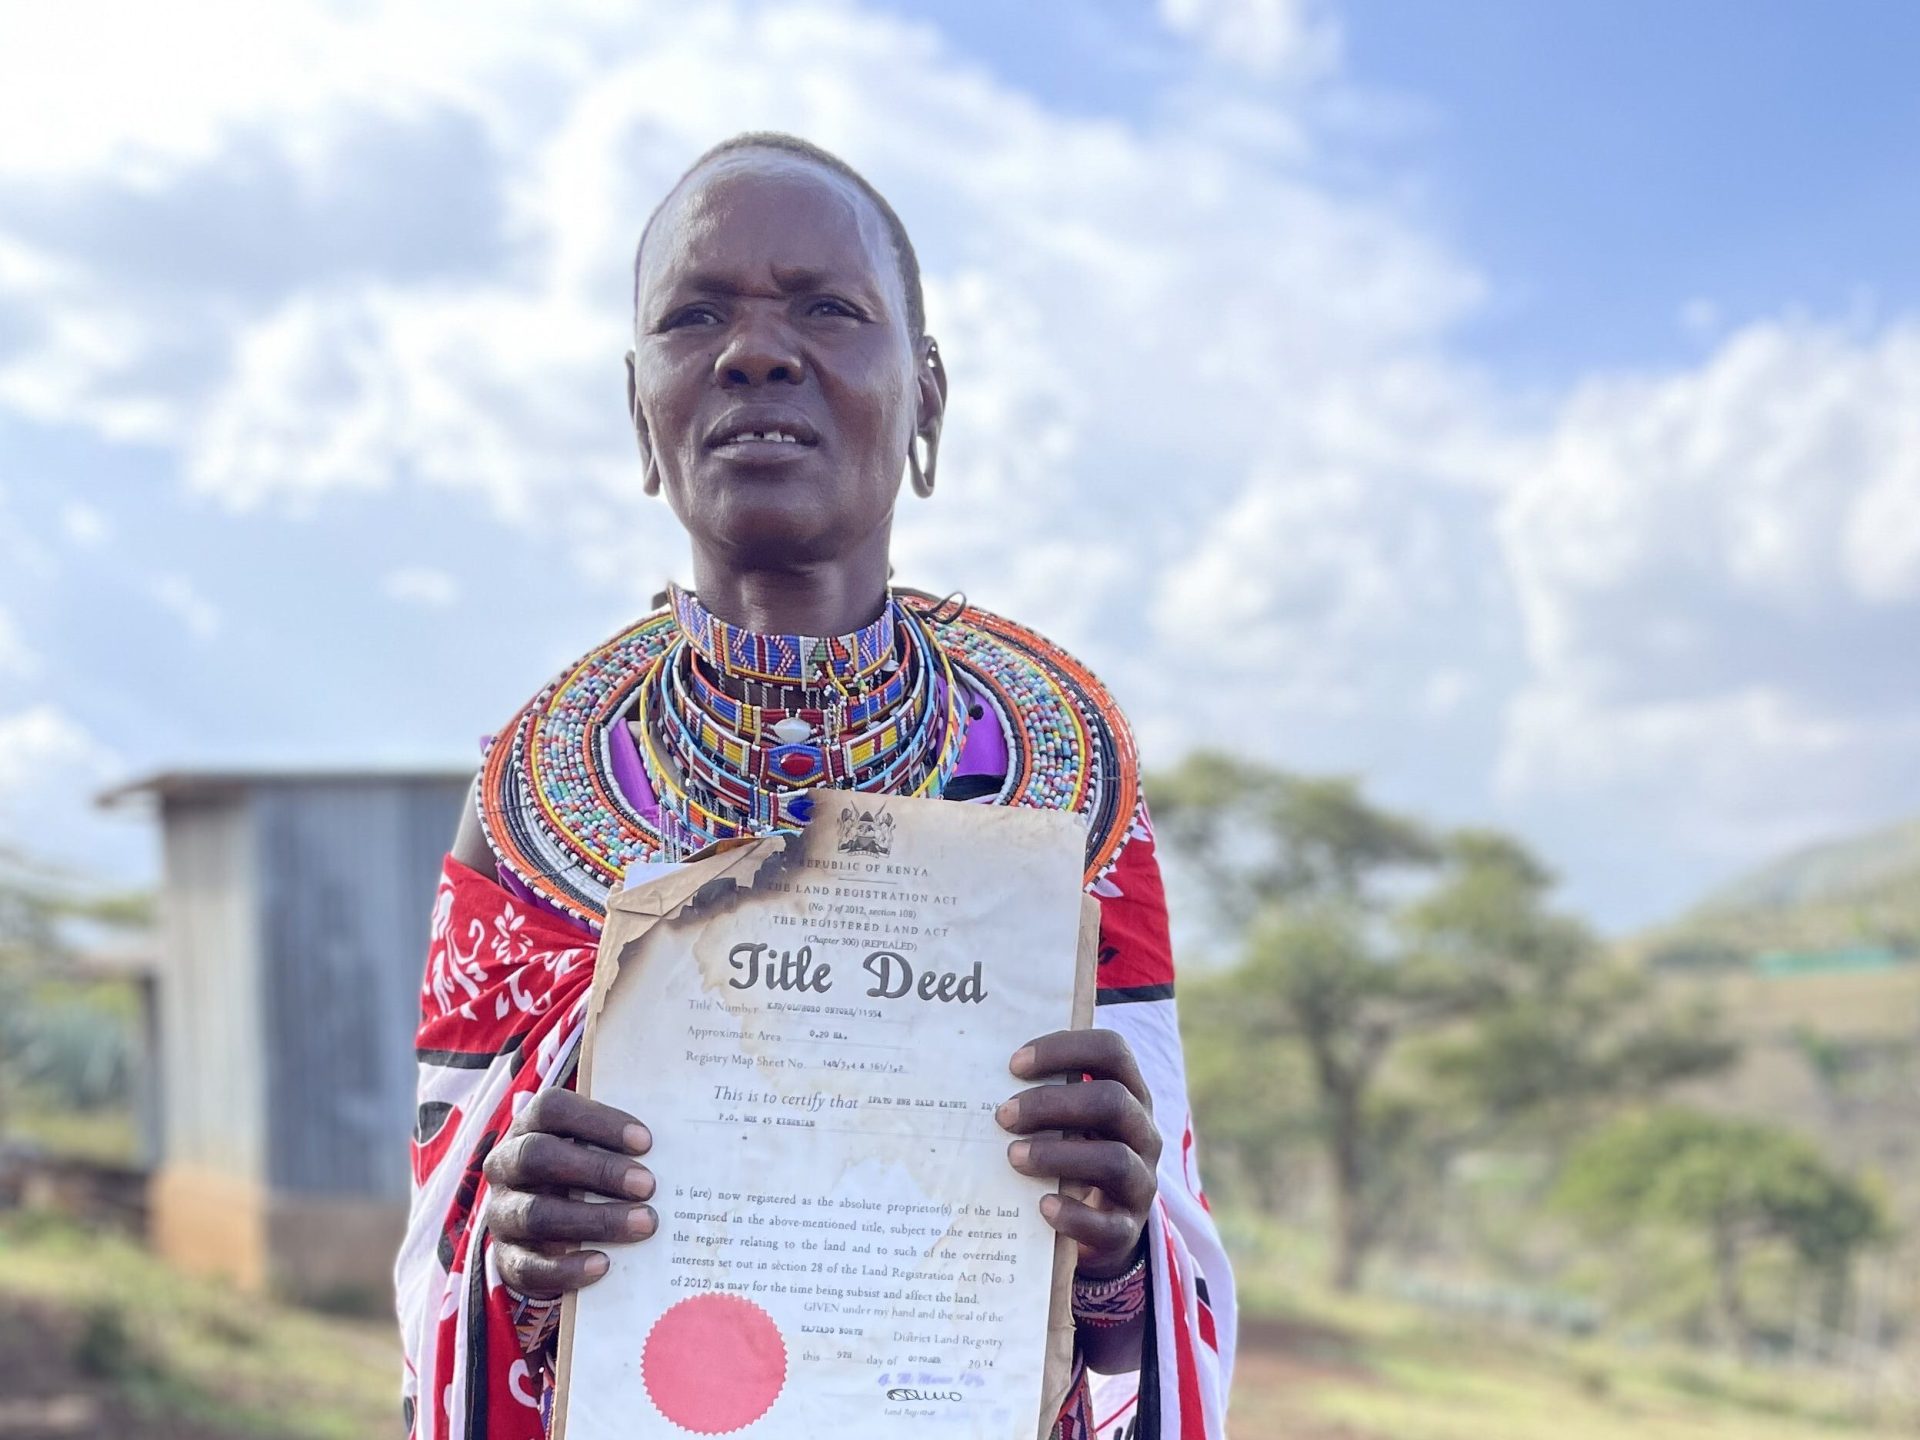 Marry My Husband Chap 45 From being property to owning one: A Maasai woman's struggle for land |  Features | Al Jazeera